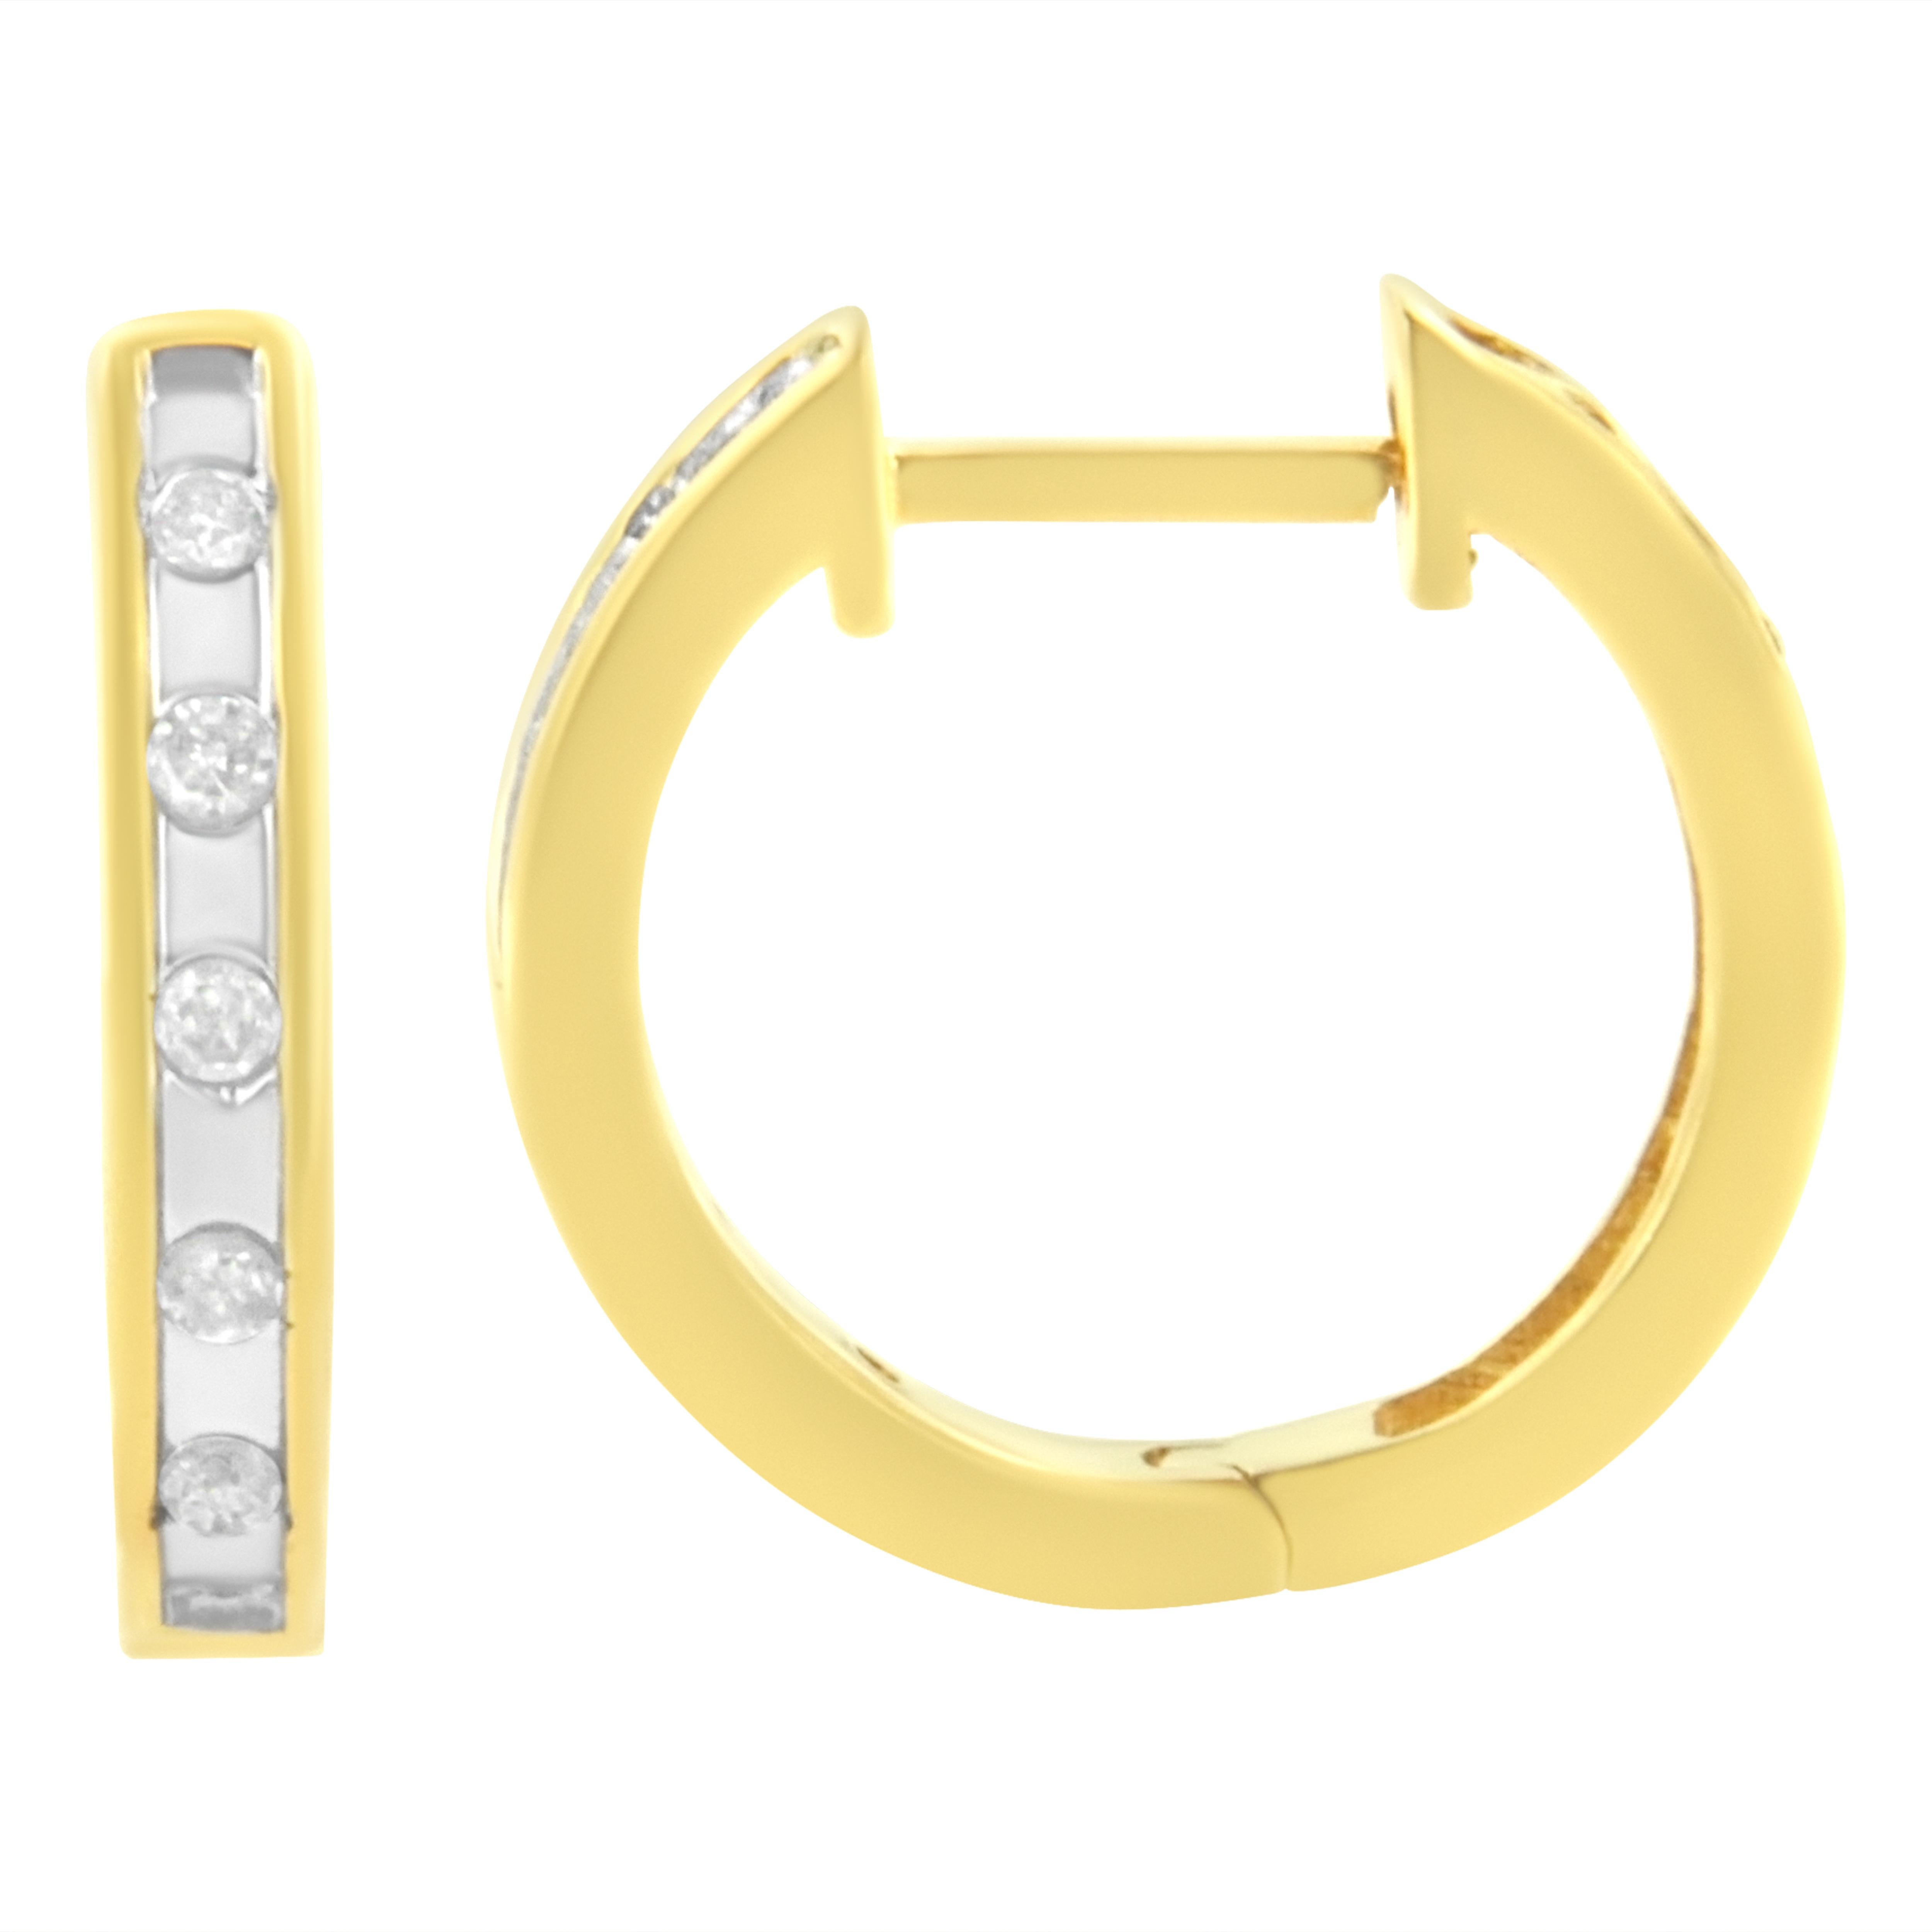 Make a statement with these 1/10 cttw diamond hoop earrings. Crafted in 10k yellow gold plated sterling silver, each of the earrings showcase five sparkling round cut diamonds on a channel setting that line the front of the hoop. A classic design